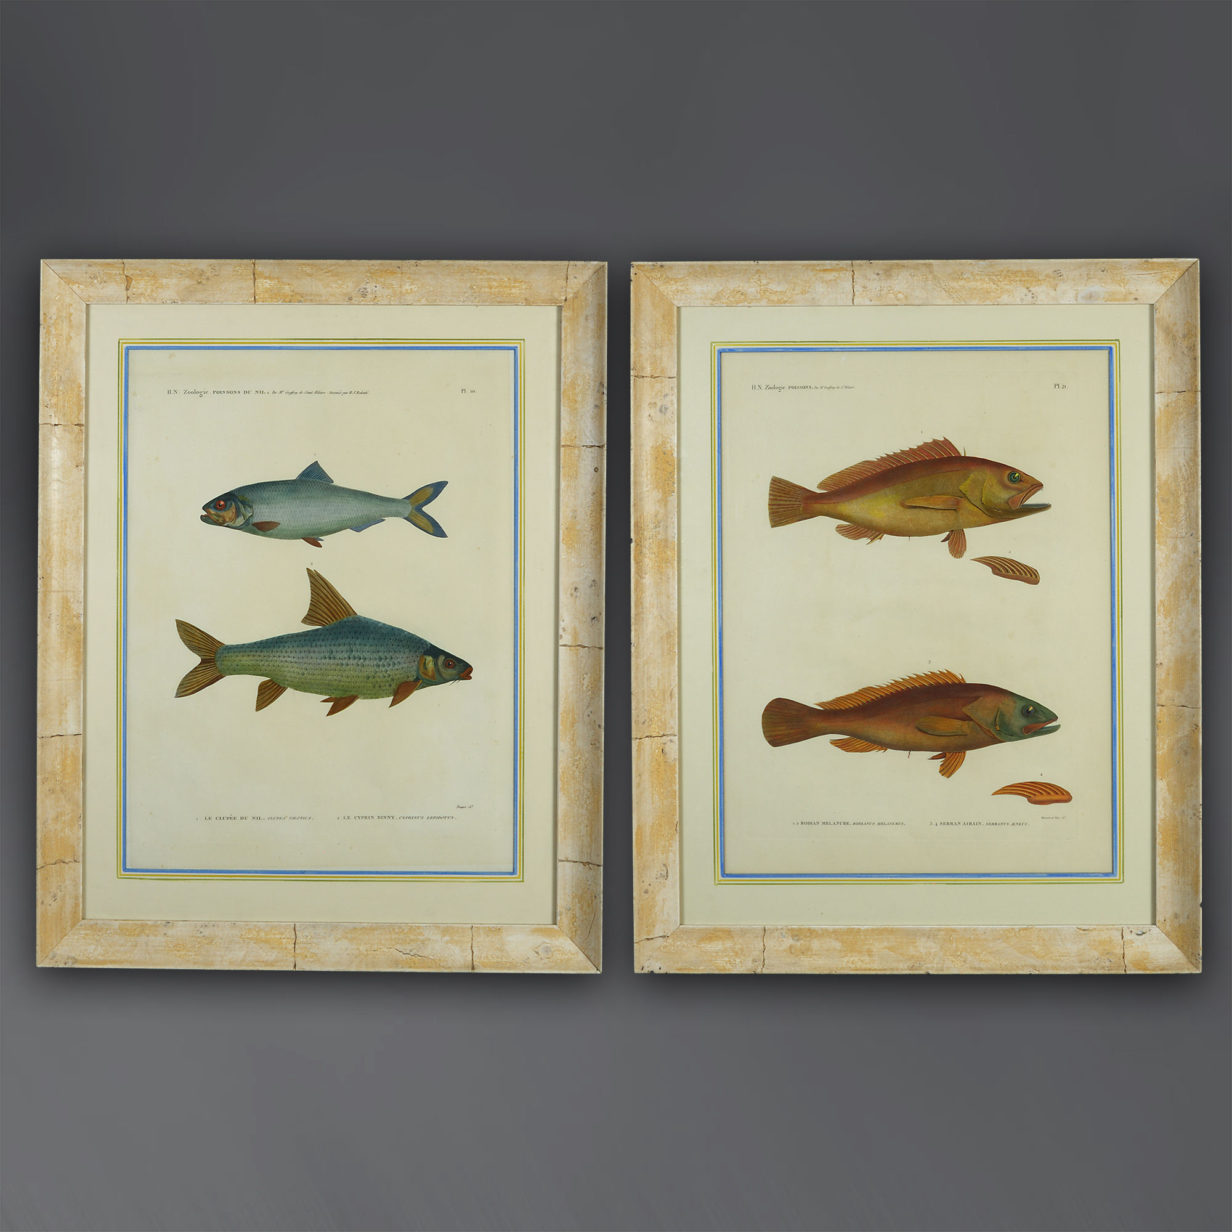 Early 19th Century Pair of Hand-Coloured Engravings of Fish from H.N. Zoologie Poissons